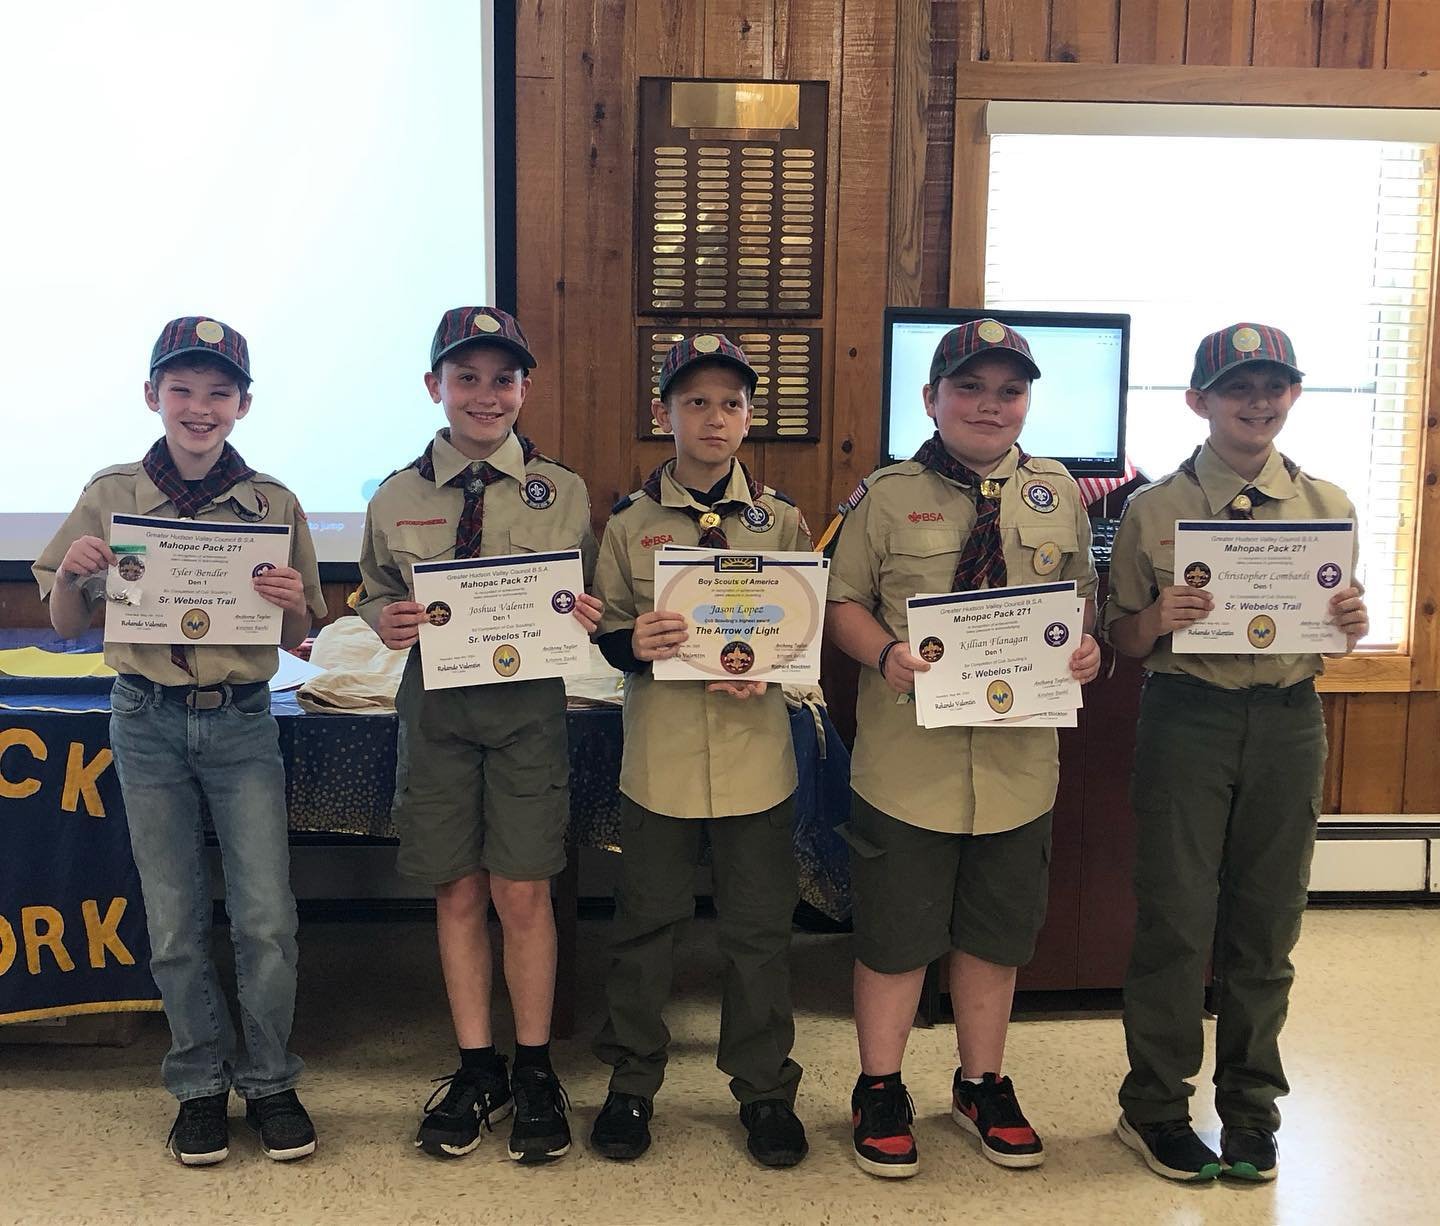 This past weekend was Tyler&rsquo;s last Blue and Gold Ceremony. He earned the Arrow of Light, the highest award in Cub Scouts. He also won the Pinewood Derby for his den for the second year in a row. Hailey won the siblings race and the fastest car 